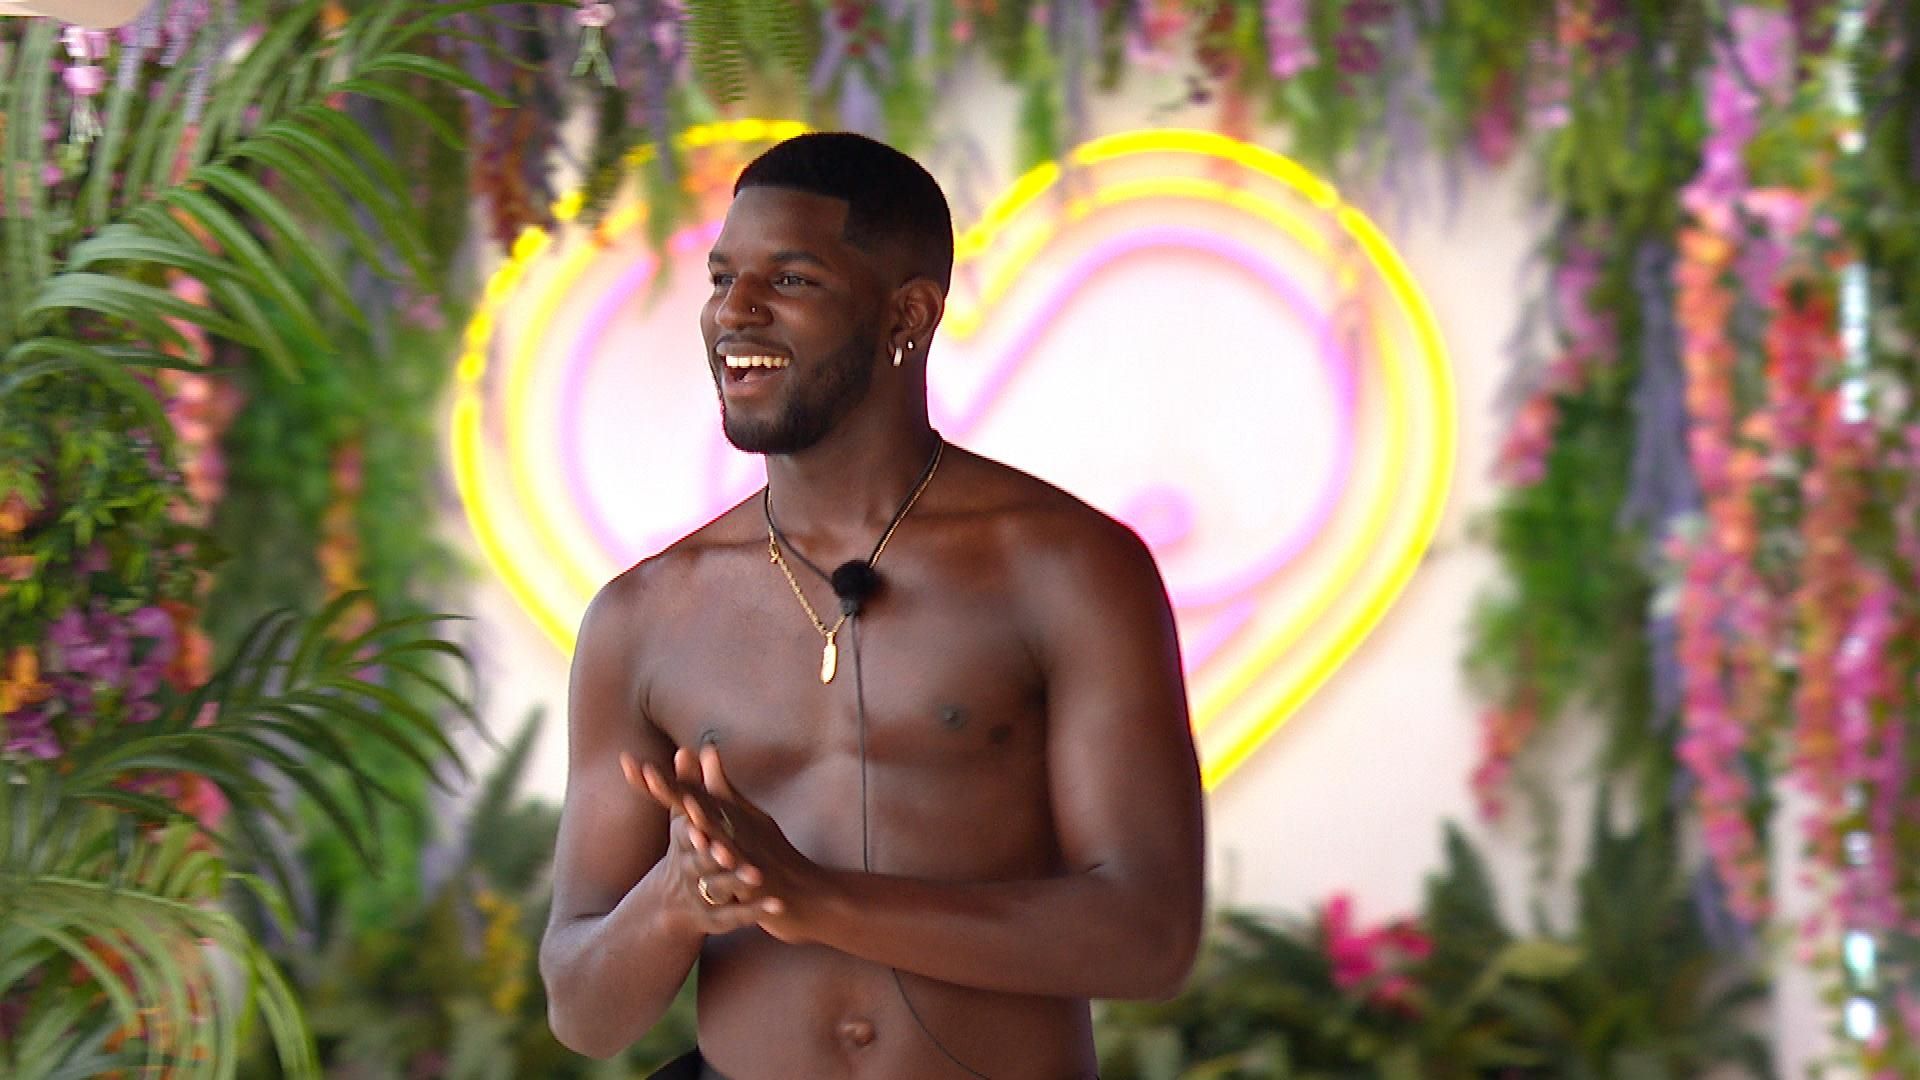 Love Island's André Furtado speaks out after exit 'It was a real